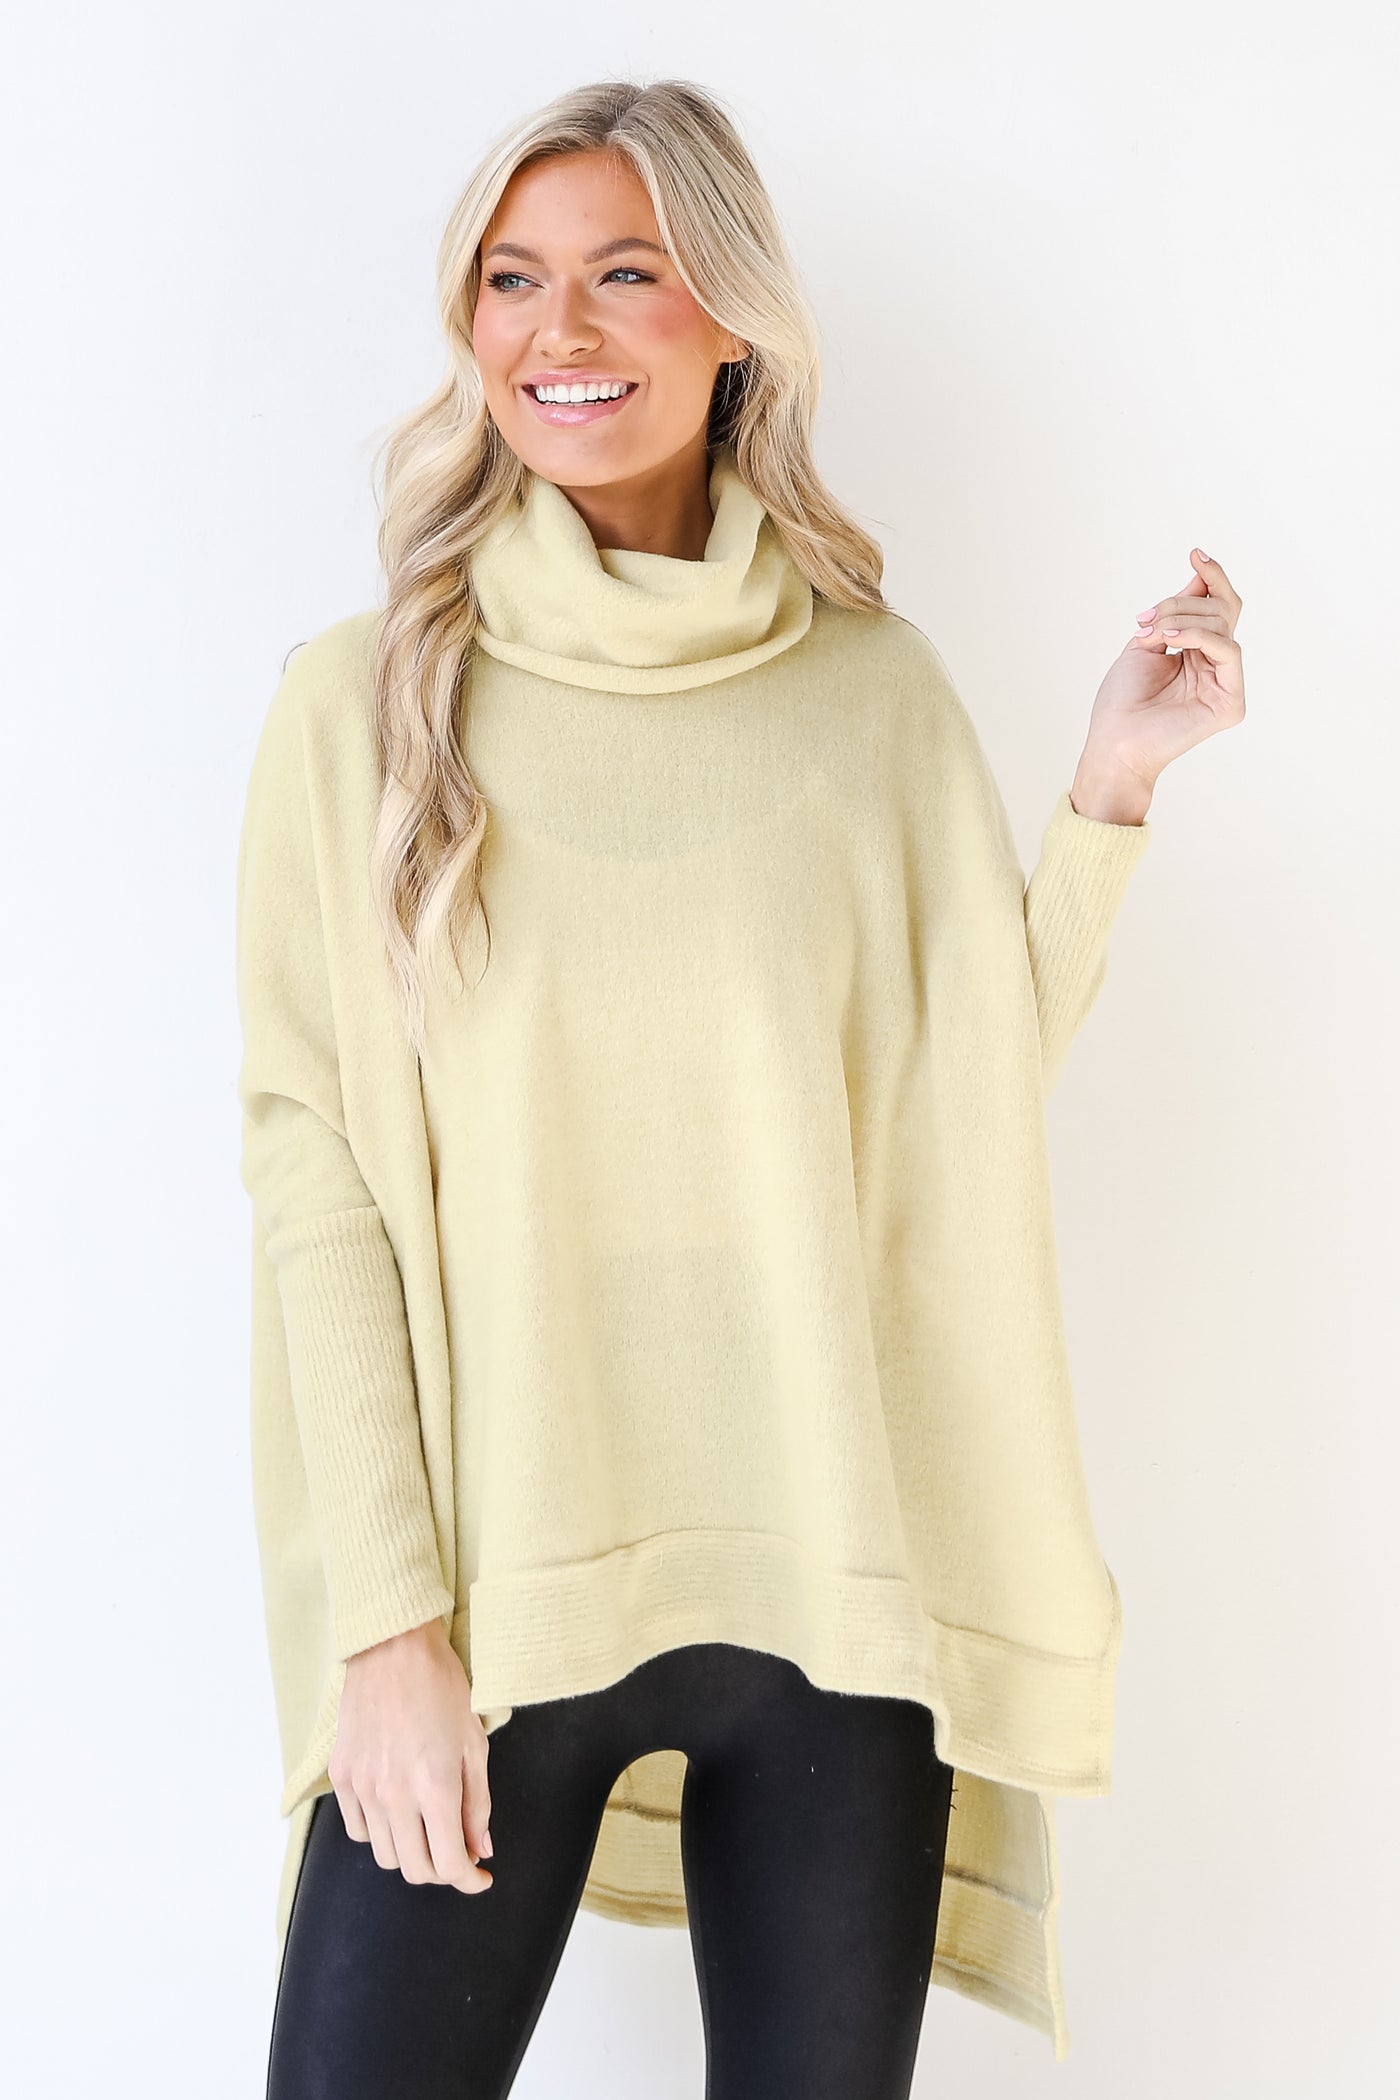 Cowl Neck Sweater in yellow on model